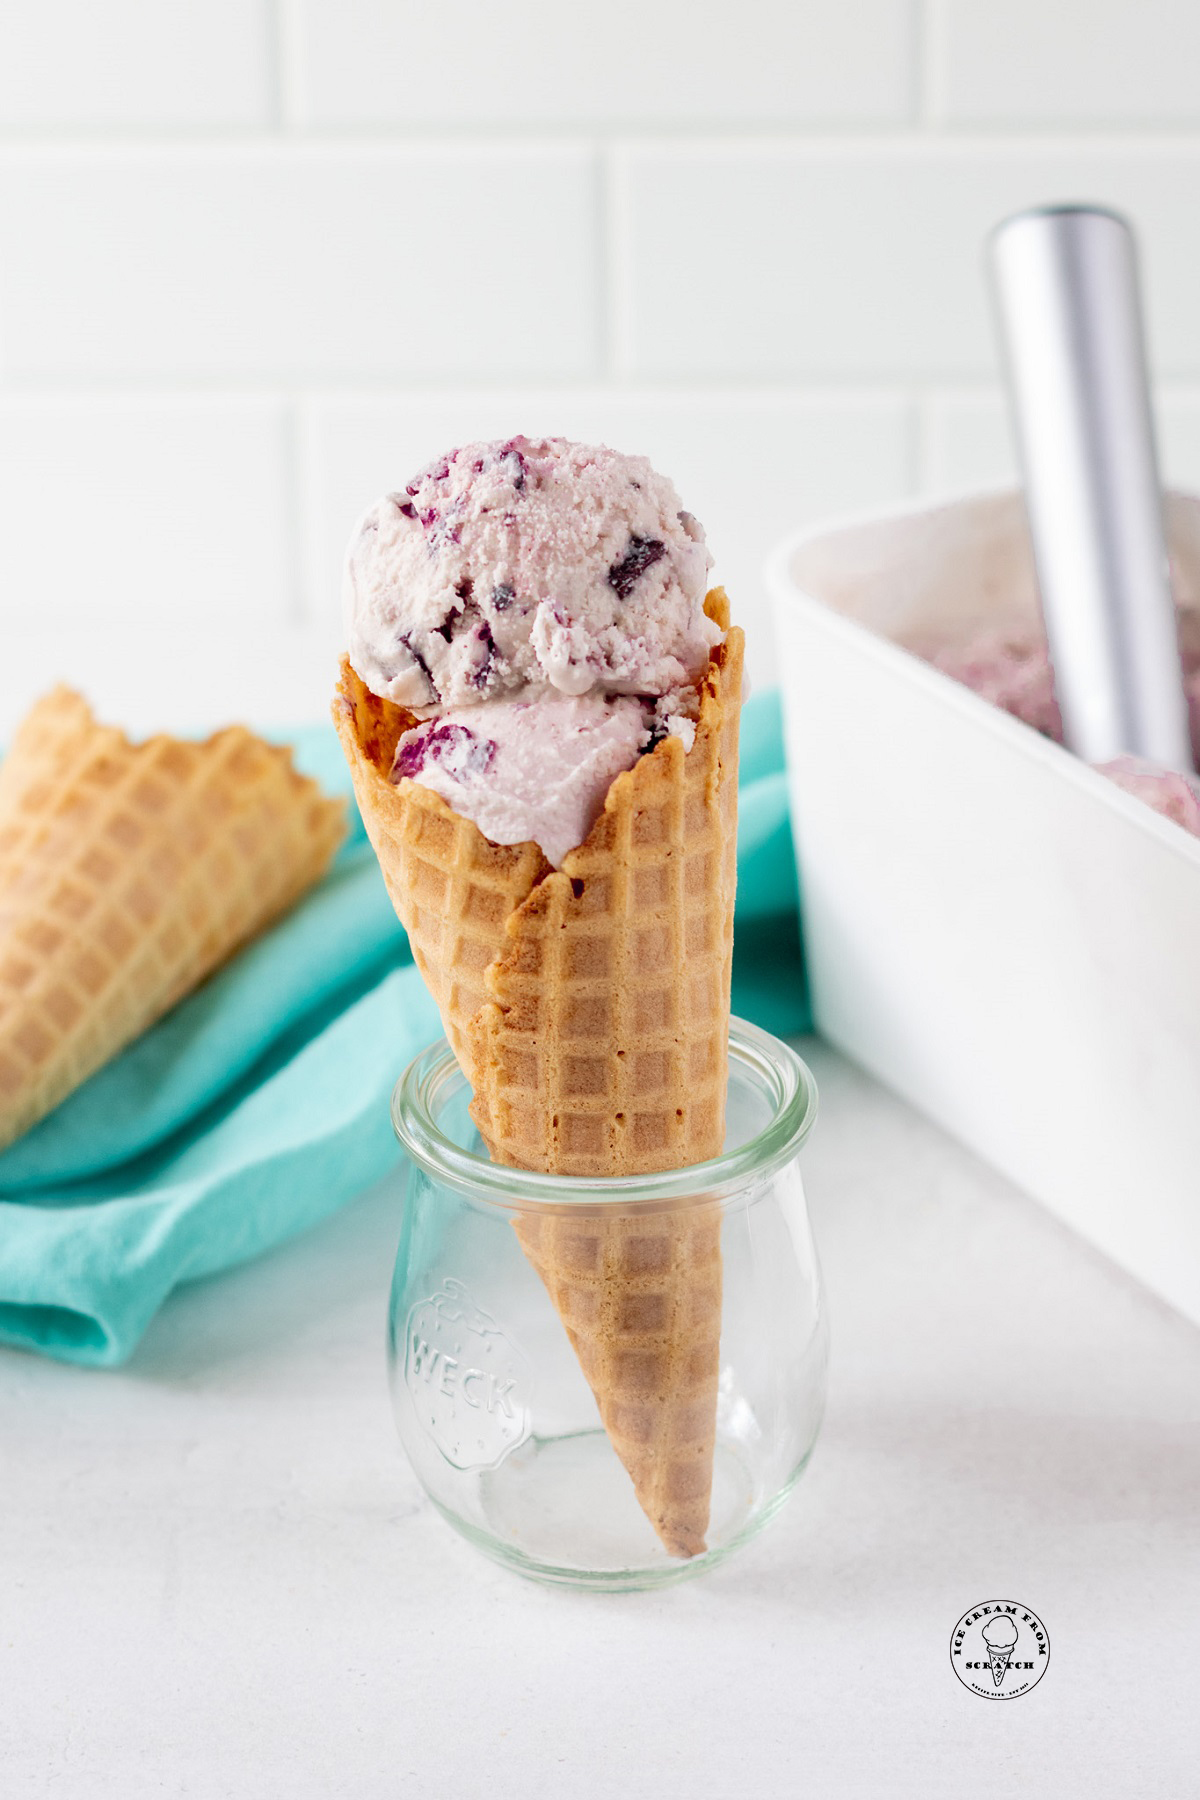 Pink amaretto ice cream with cherry chunks, in a waffle cone, propped up in a small glass jar.